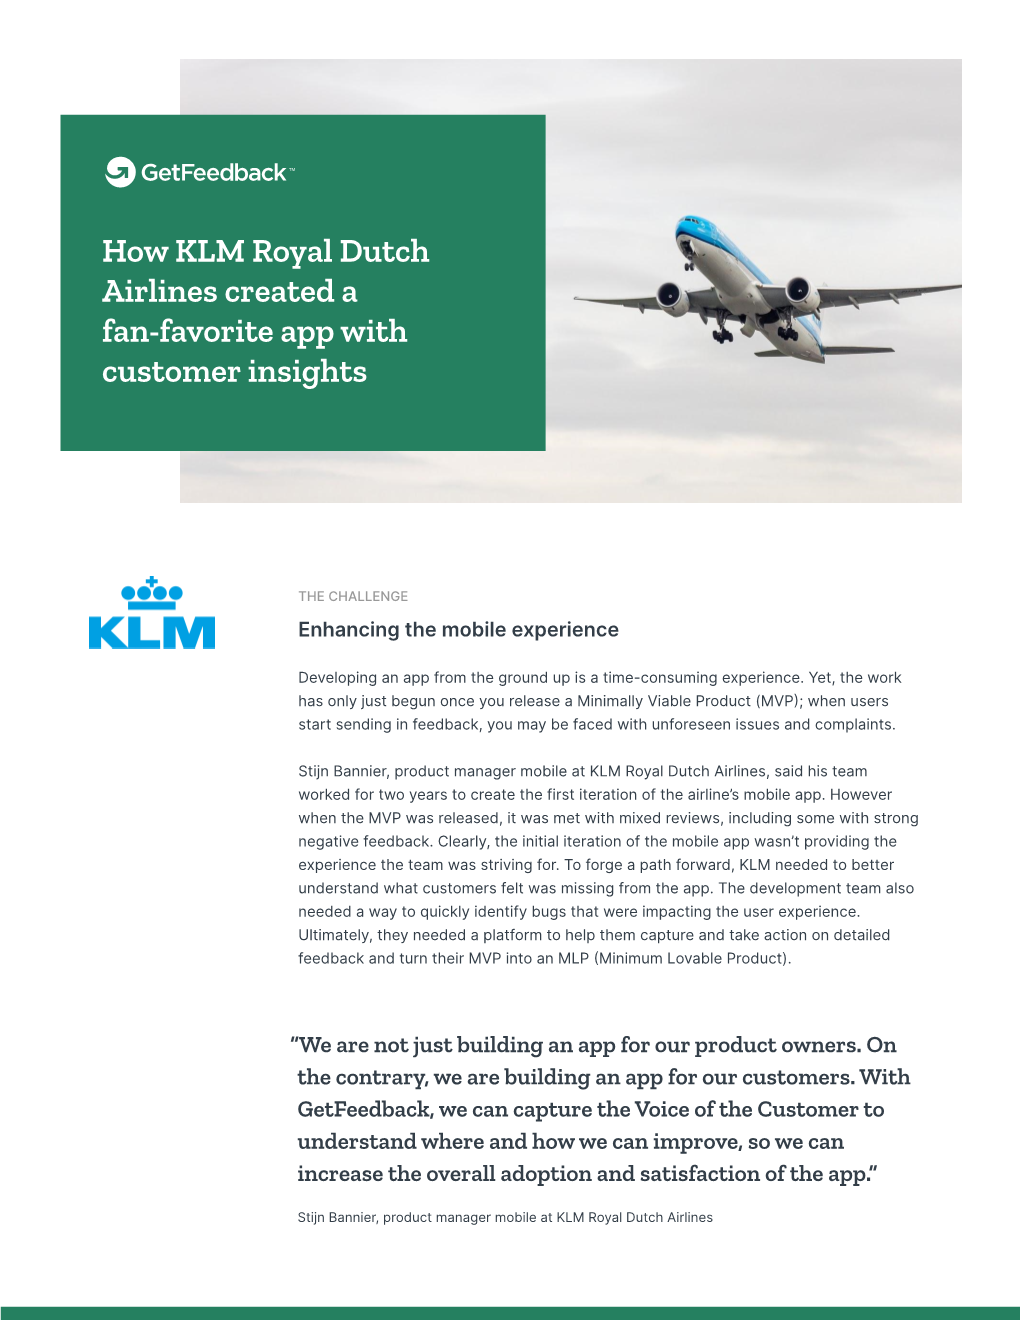 How KLM Royal Dutch Airlines Created a Fan-Favorite App with Customer Insights